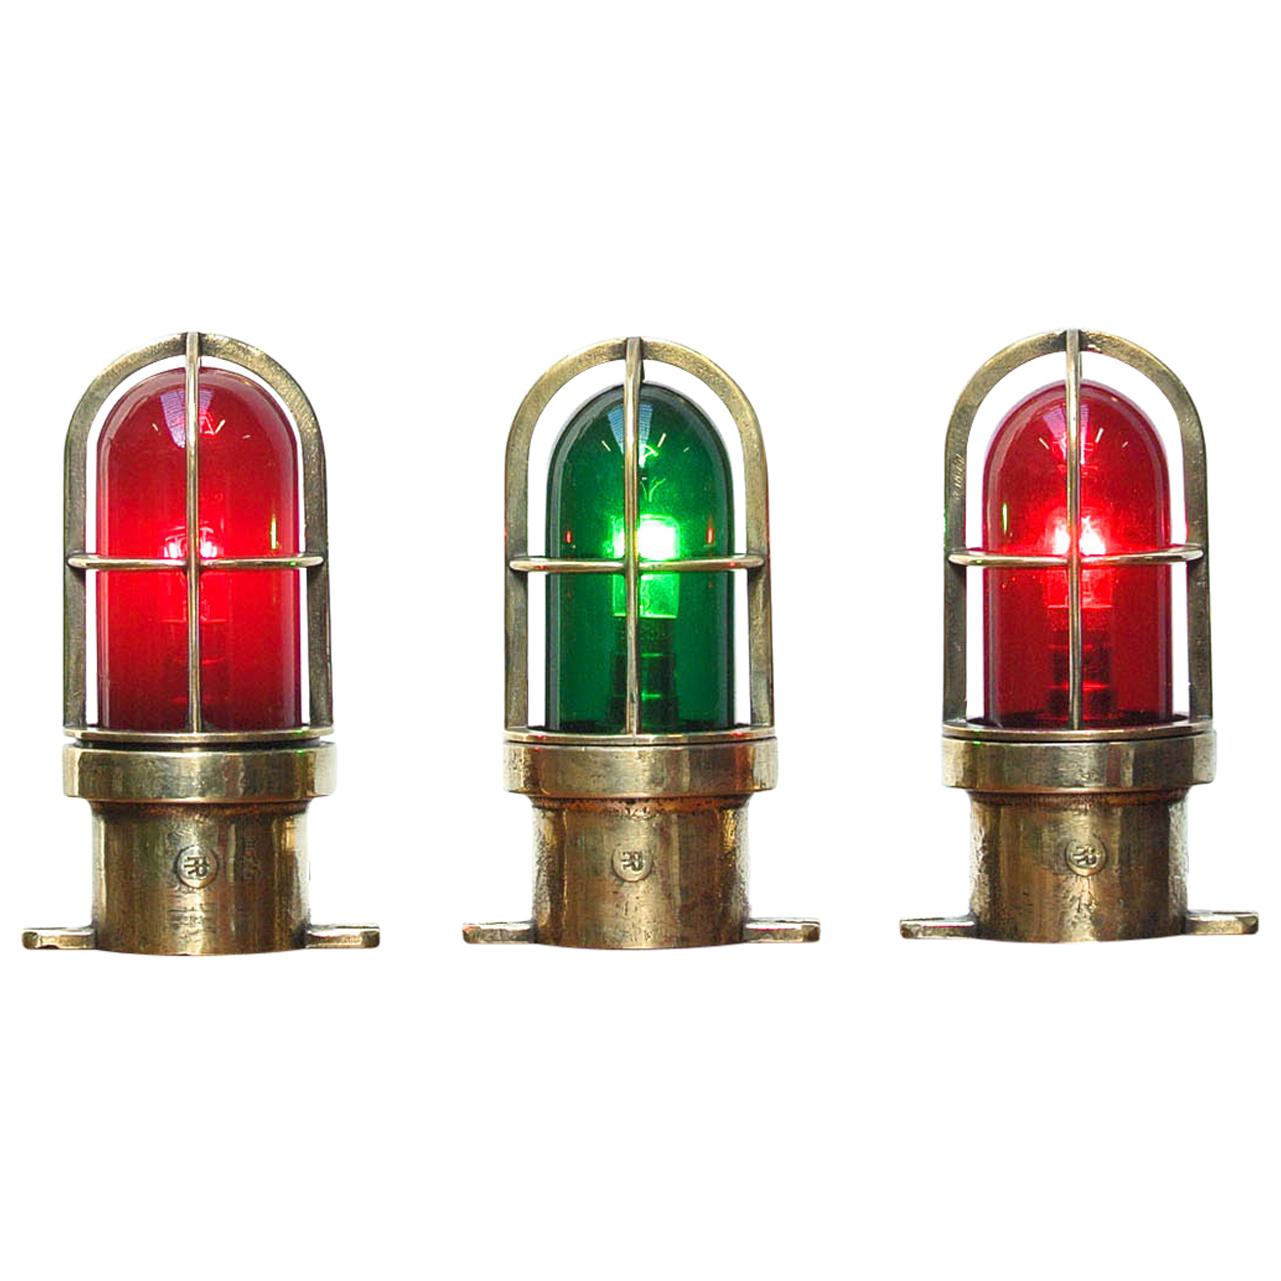 Set of 3 Small Signal Lamp in Brass and Colored Glass, France, circa 1950-1959